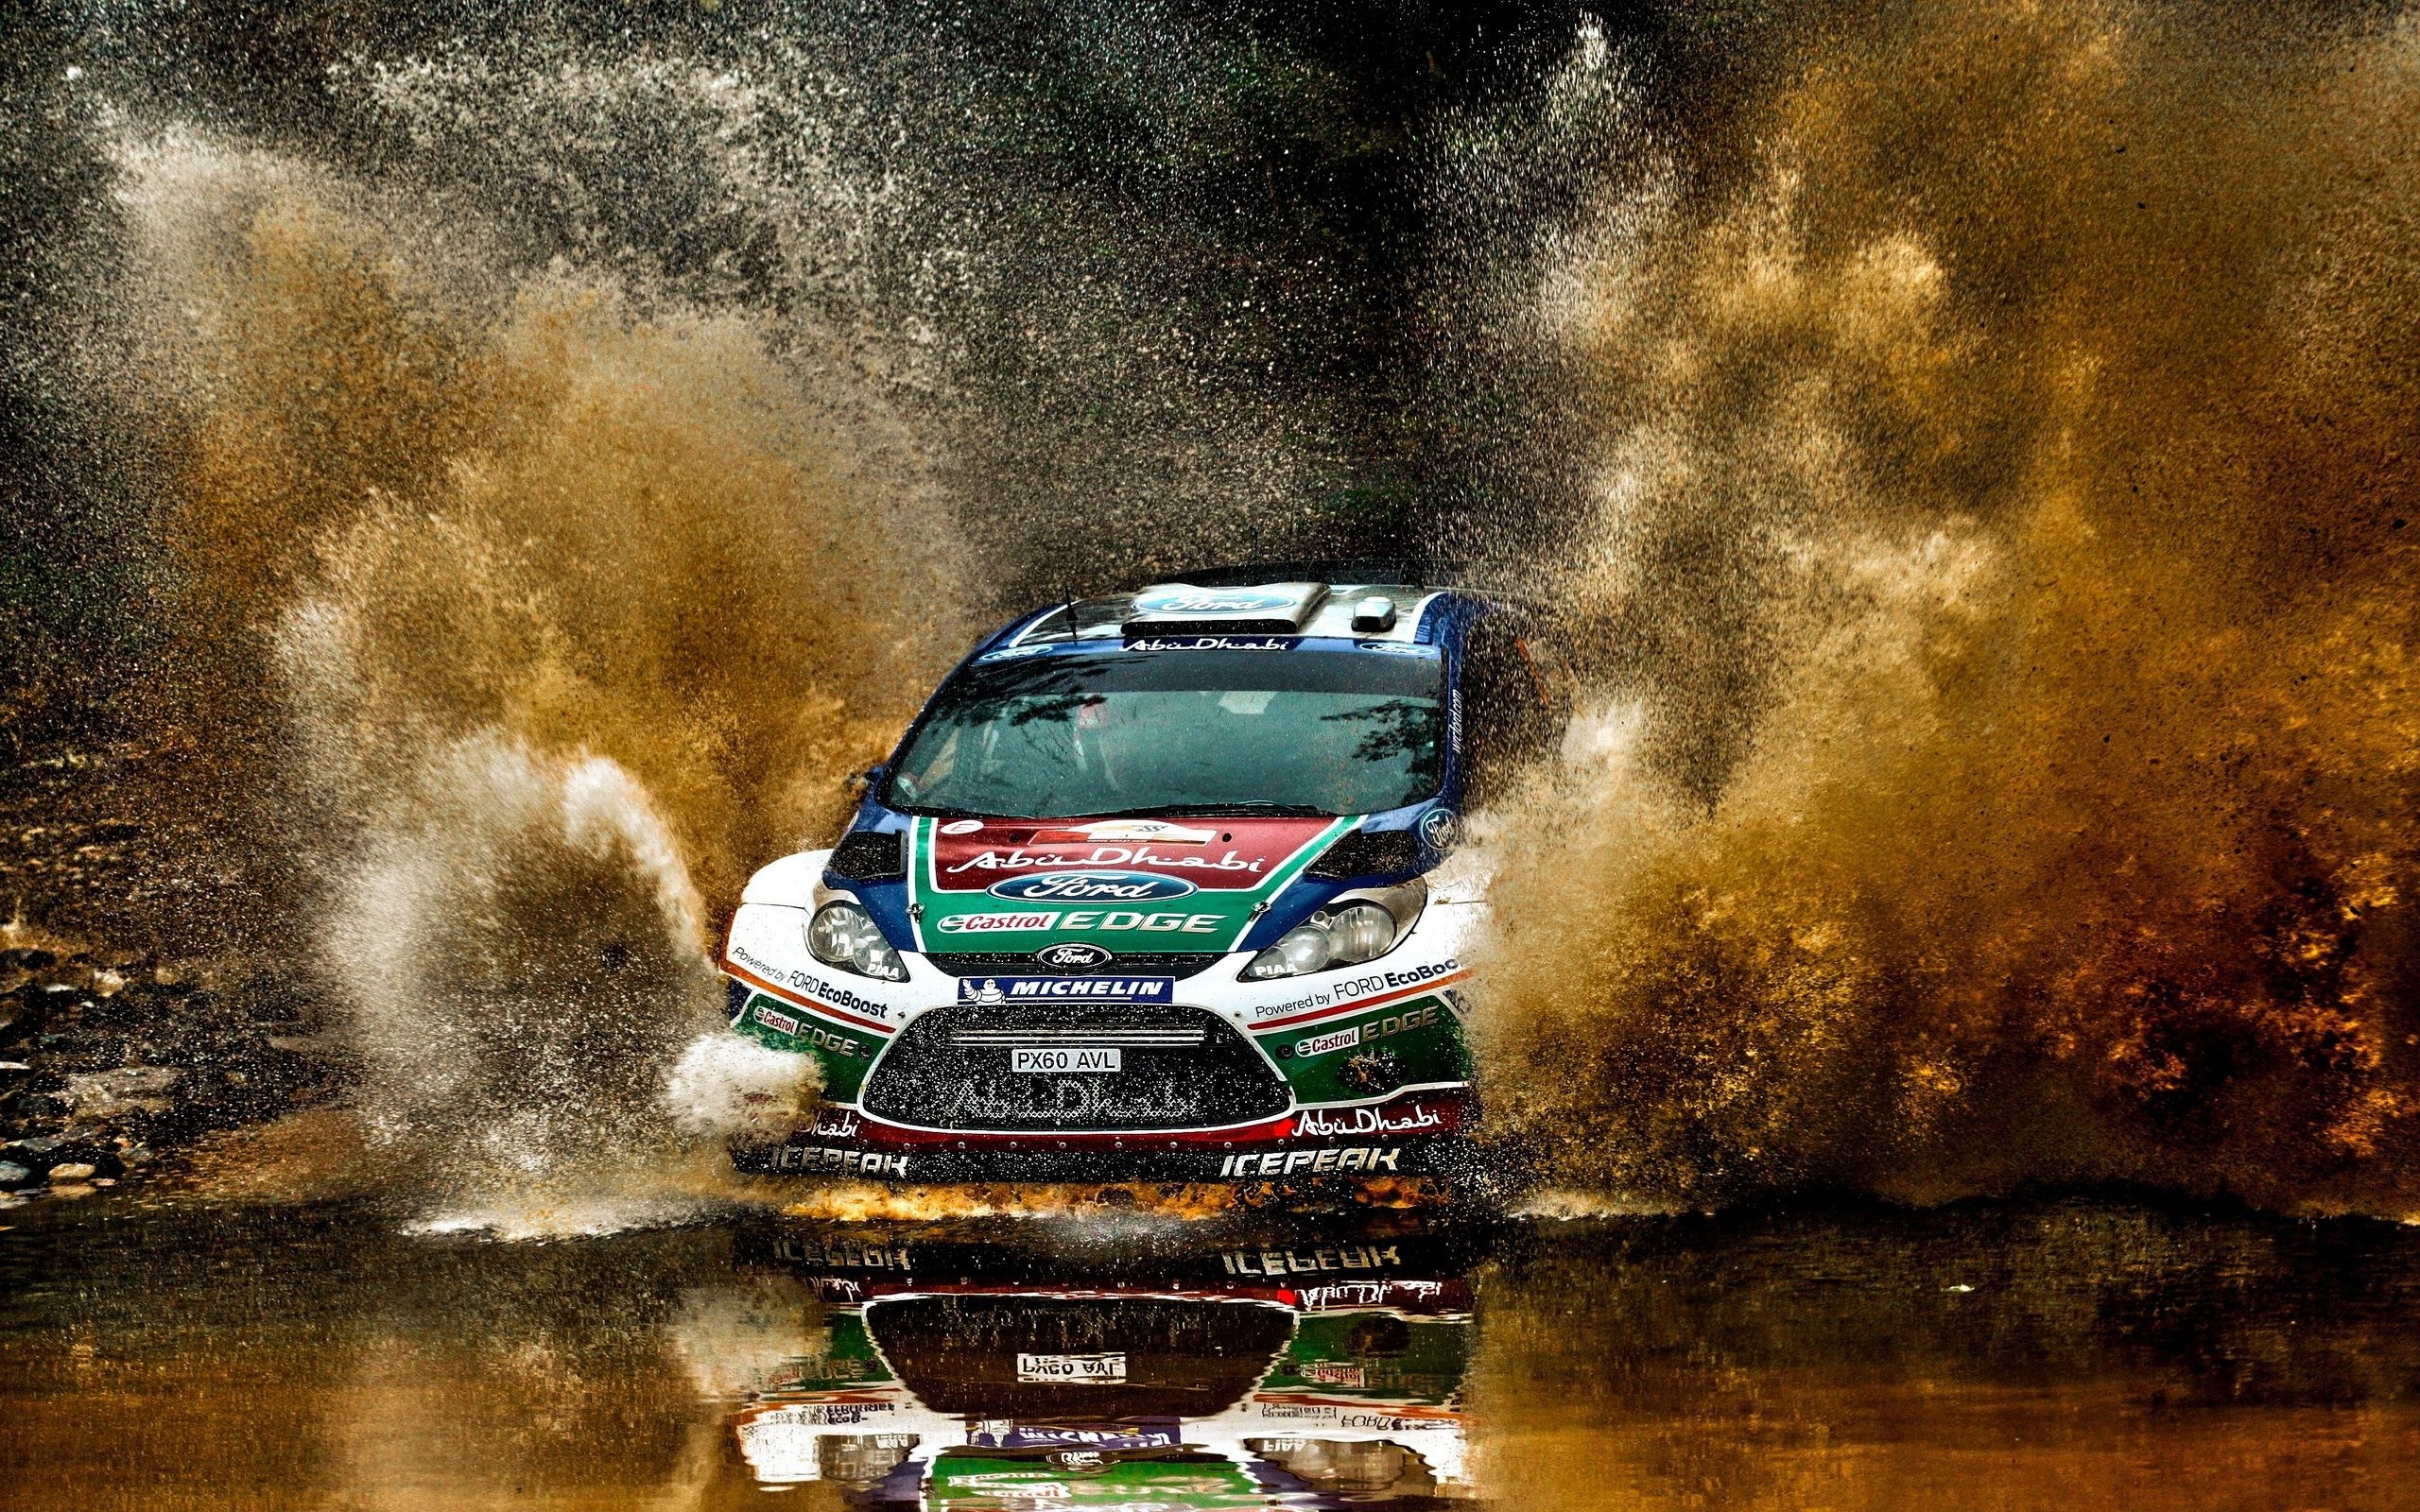 Rallycross: Ford, Michelin, The Abu Dhabi Grand Prix, Reinforced Tires Splashes Out the Water. 2560x1600 HD Wallpaper.